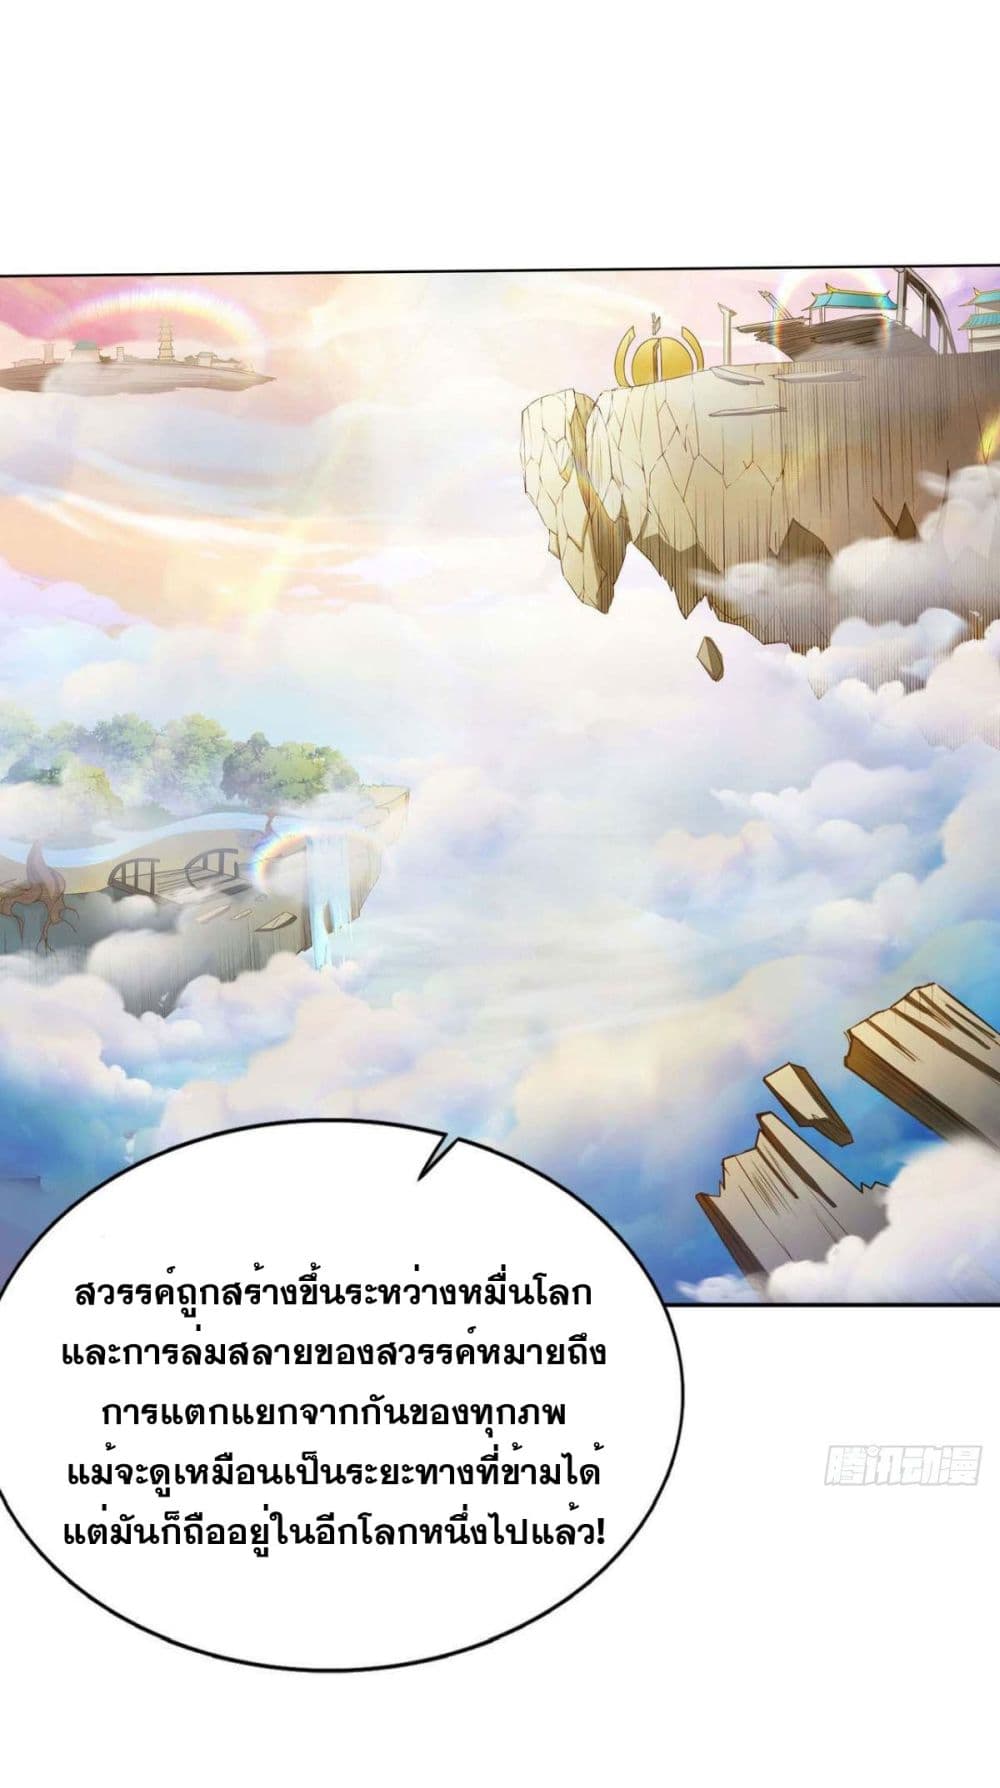 Solve the Crisis of Heaven 2 (17)